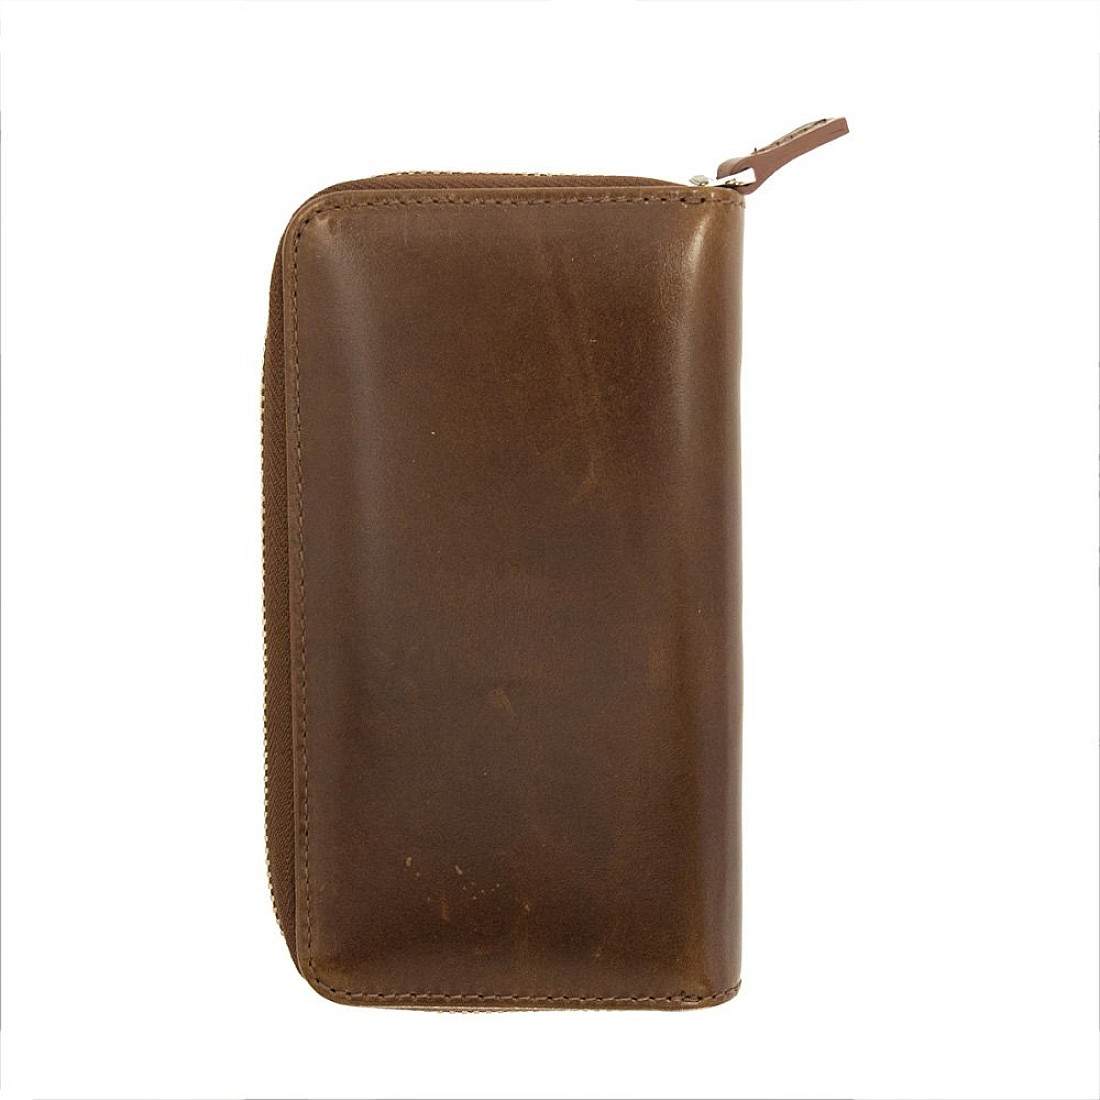 Galen Leather Chocolate Brown Zippered Pen Pouch (Triple)